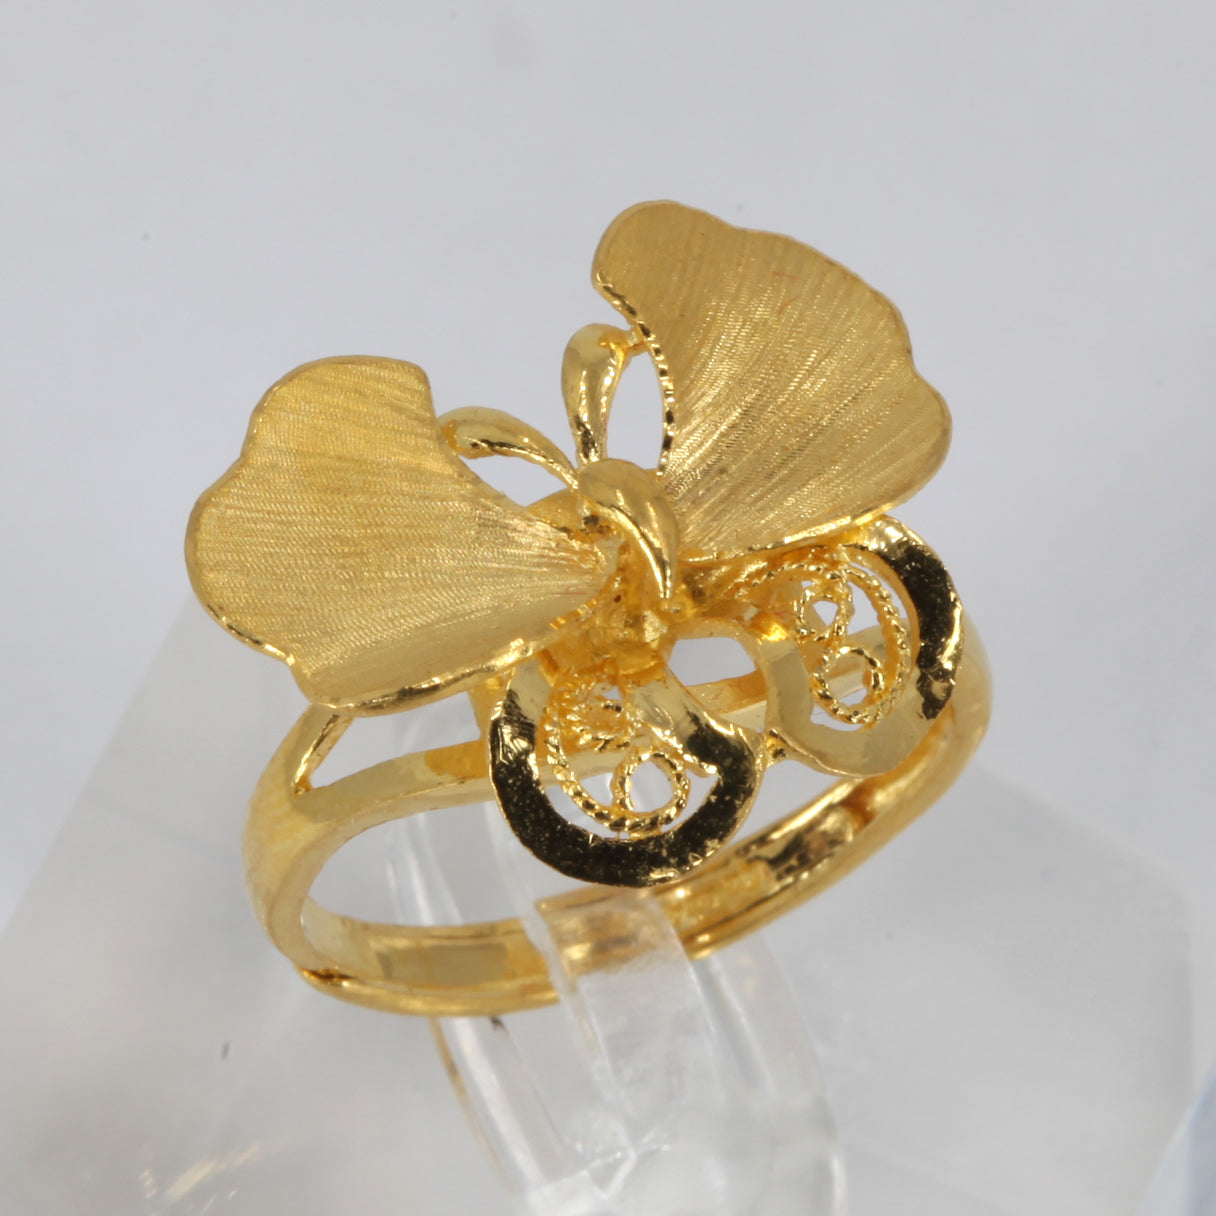 24K Solid Yellow Gold Women Butterfly Ring Band 6.0 Grams